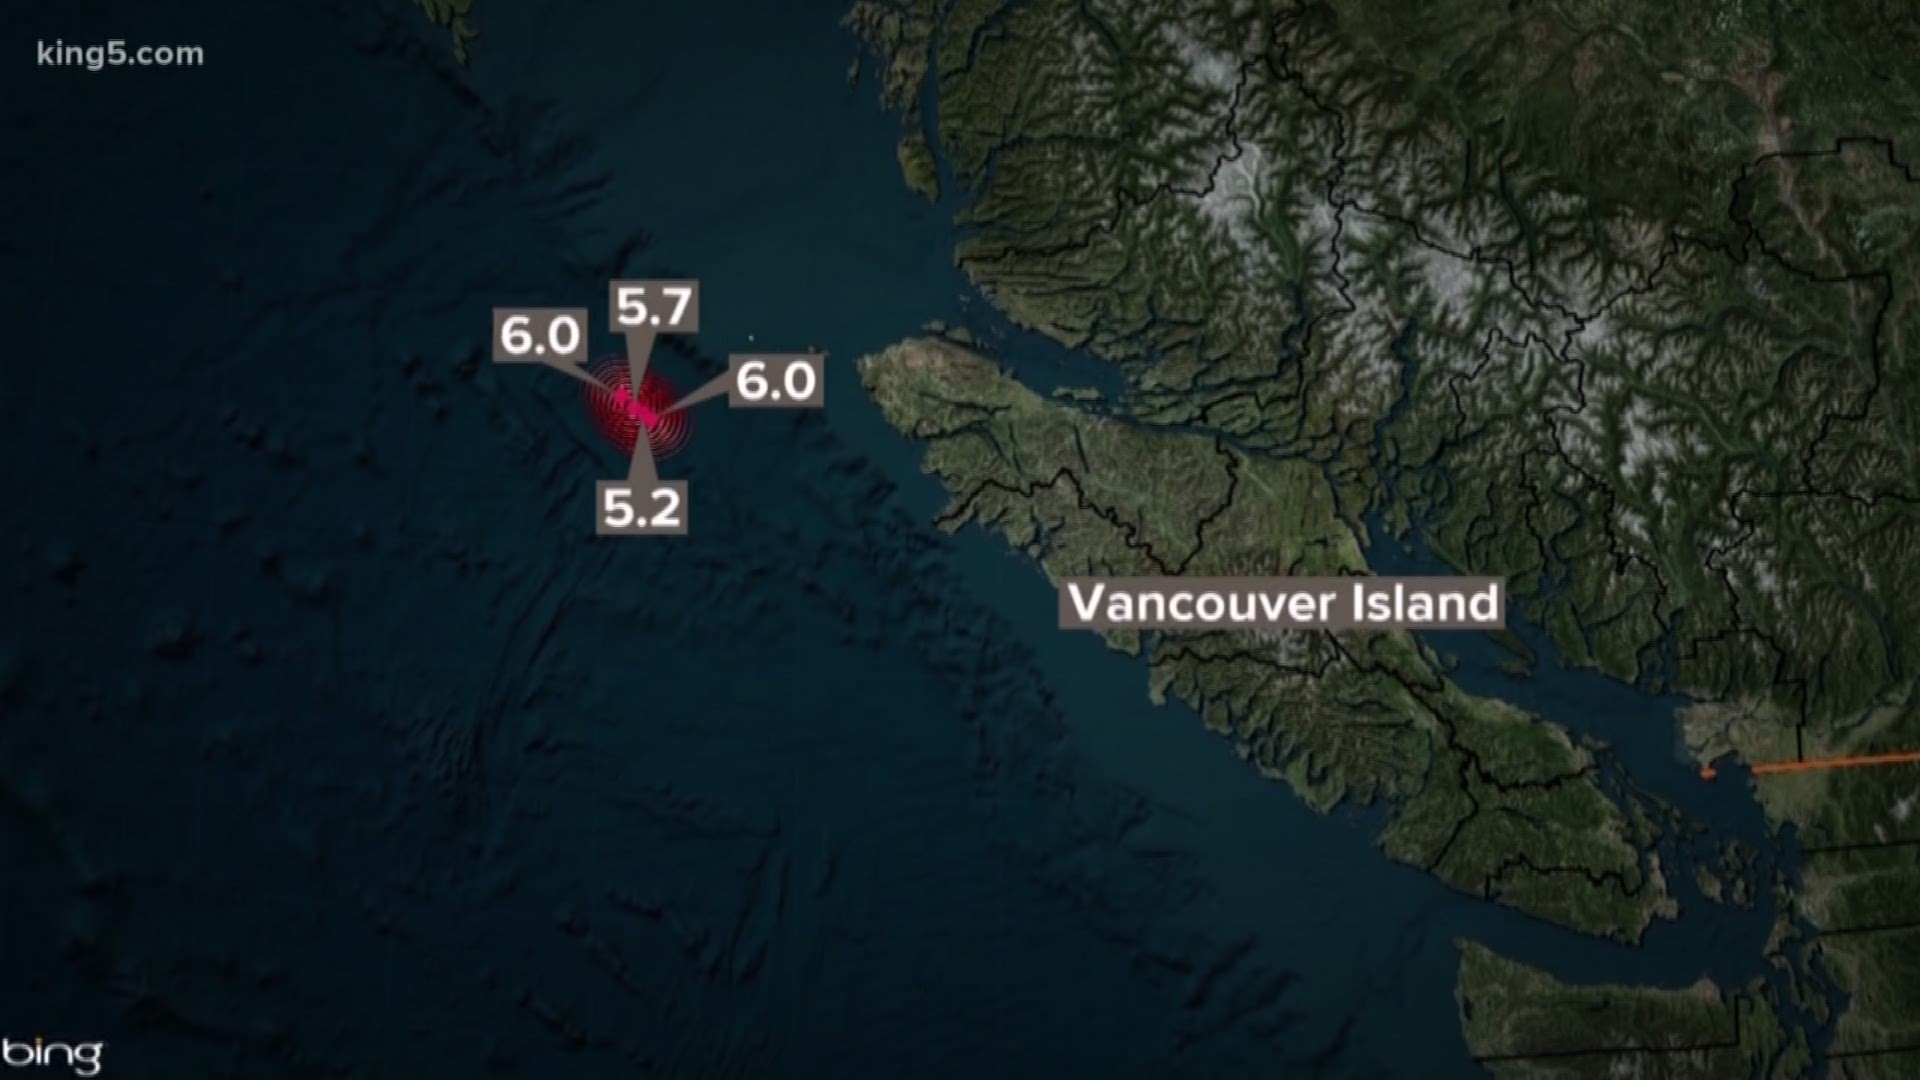 Seismologists say the quakes are not any indication of a larger event.